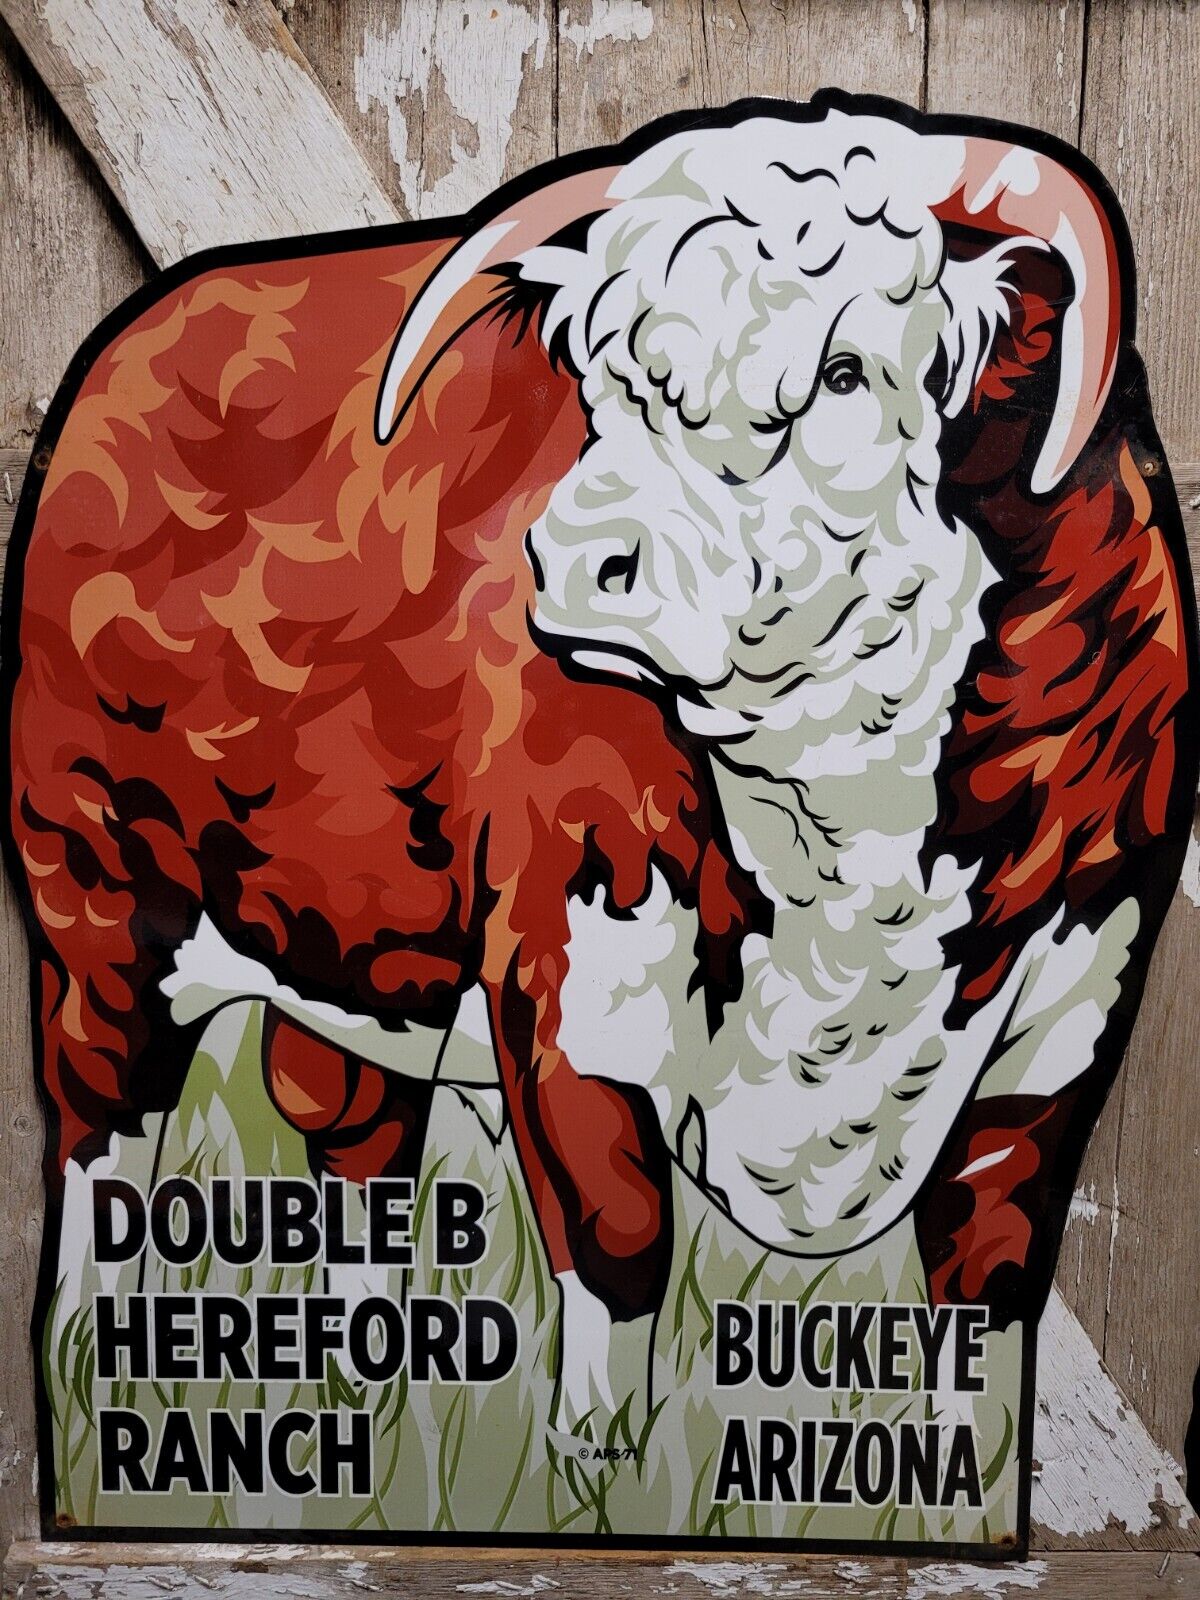 VINTAGE DOUBLE B HEREFORD RANCH PORCELAIN SIGN 1971 LIVESTOCK COW ARIZONA 36